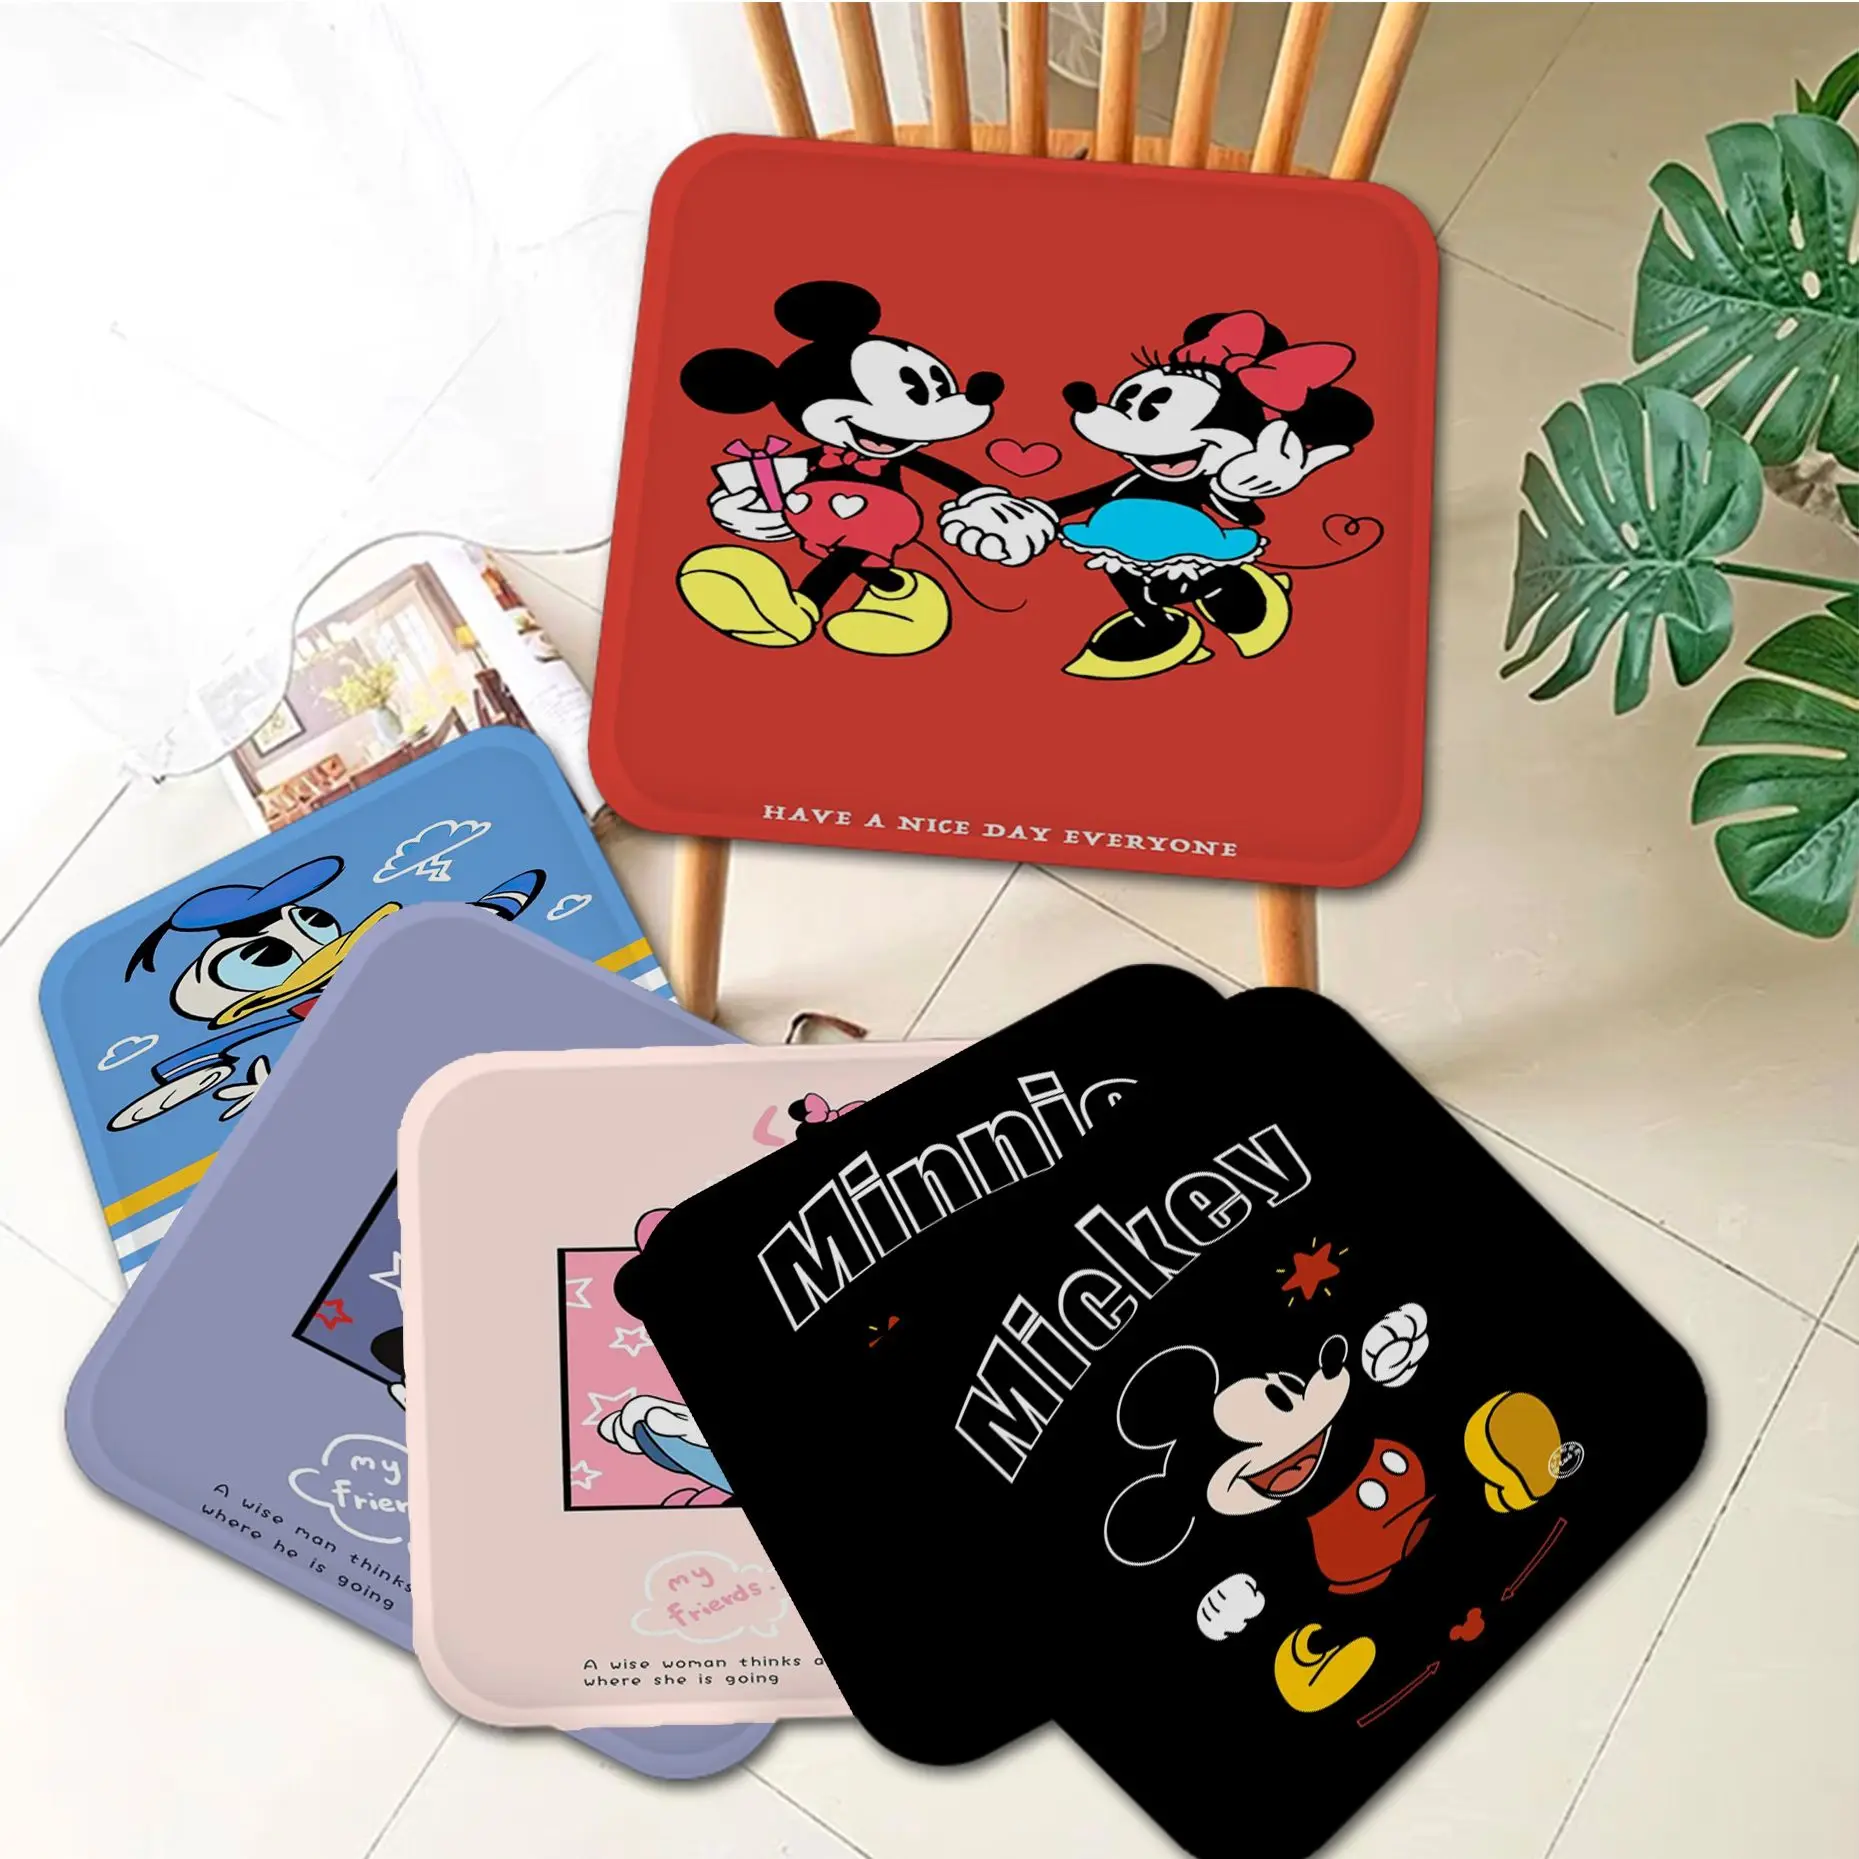 

Disney Mickey Minne Mouse Donald Duck Decorative Stool Pad Patio Home Kitchen Office Chair Seat Cushion Pads Sofa Seat Cushions